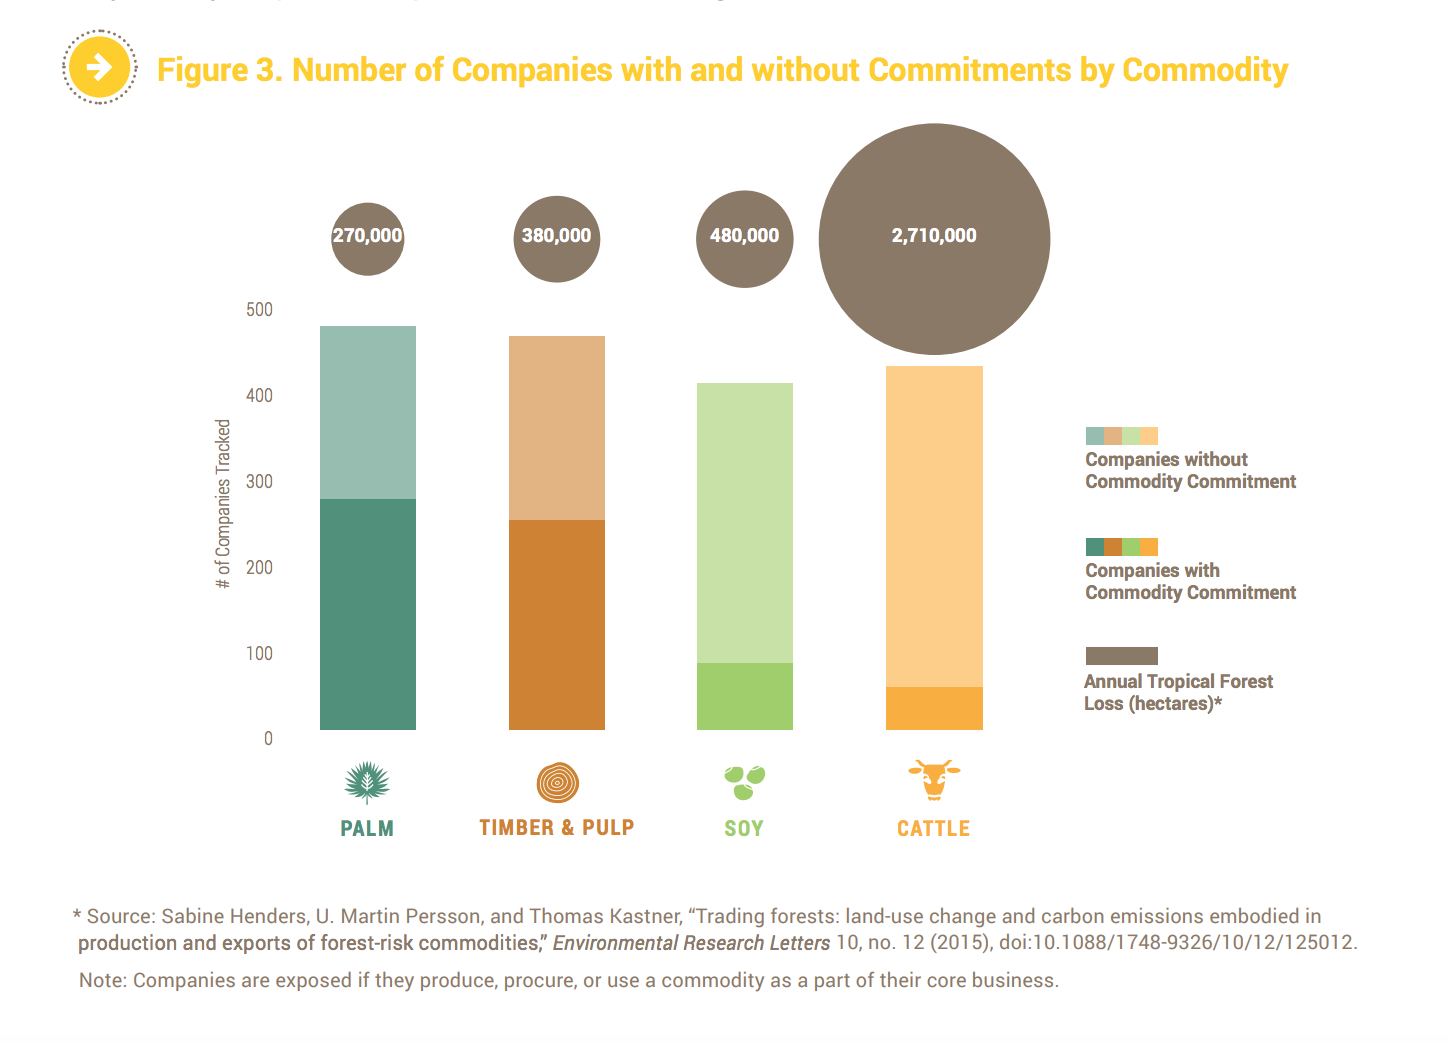  Palm  oil  is the leading industry in sustainable forestry 